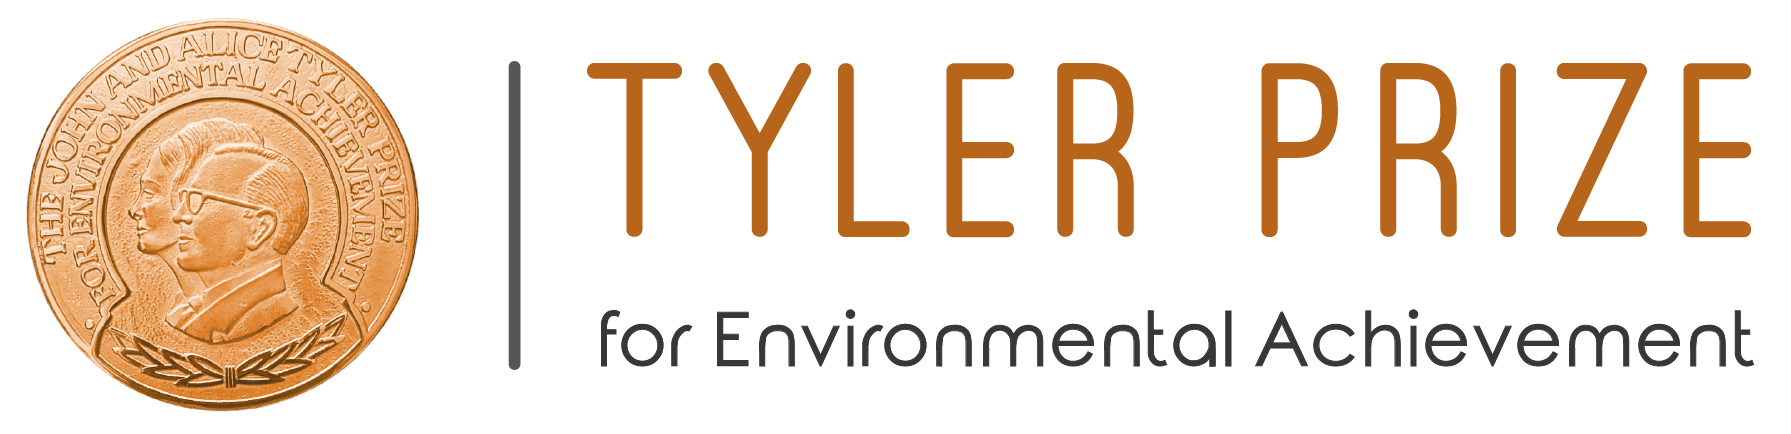 TYLER PRIZE LOGO _low res.png